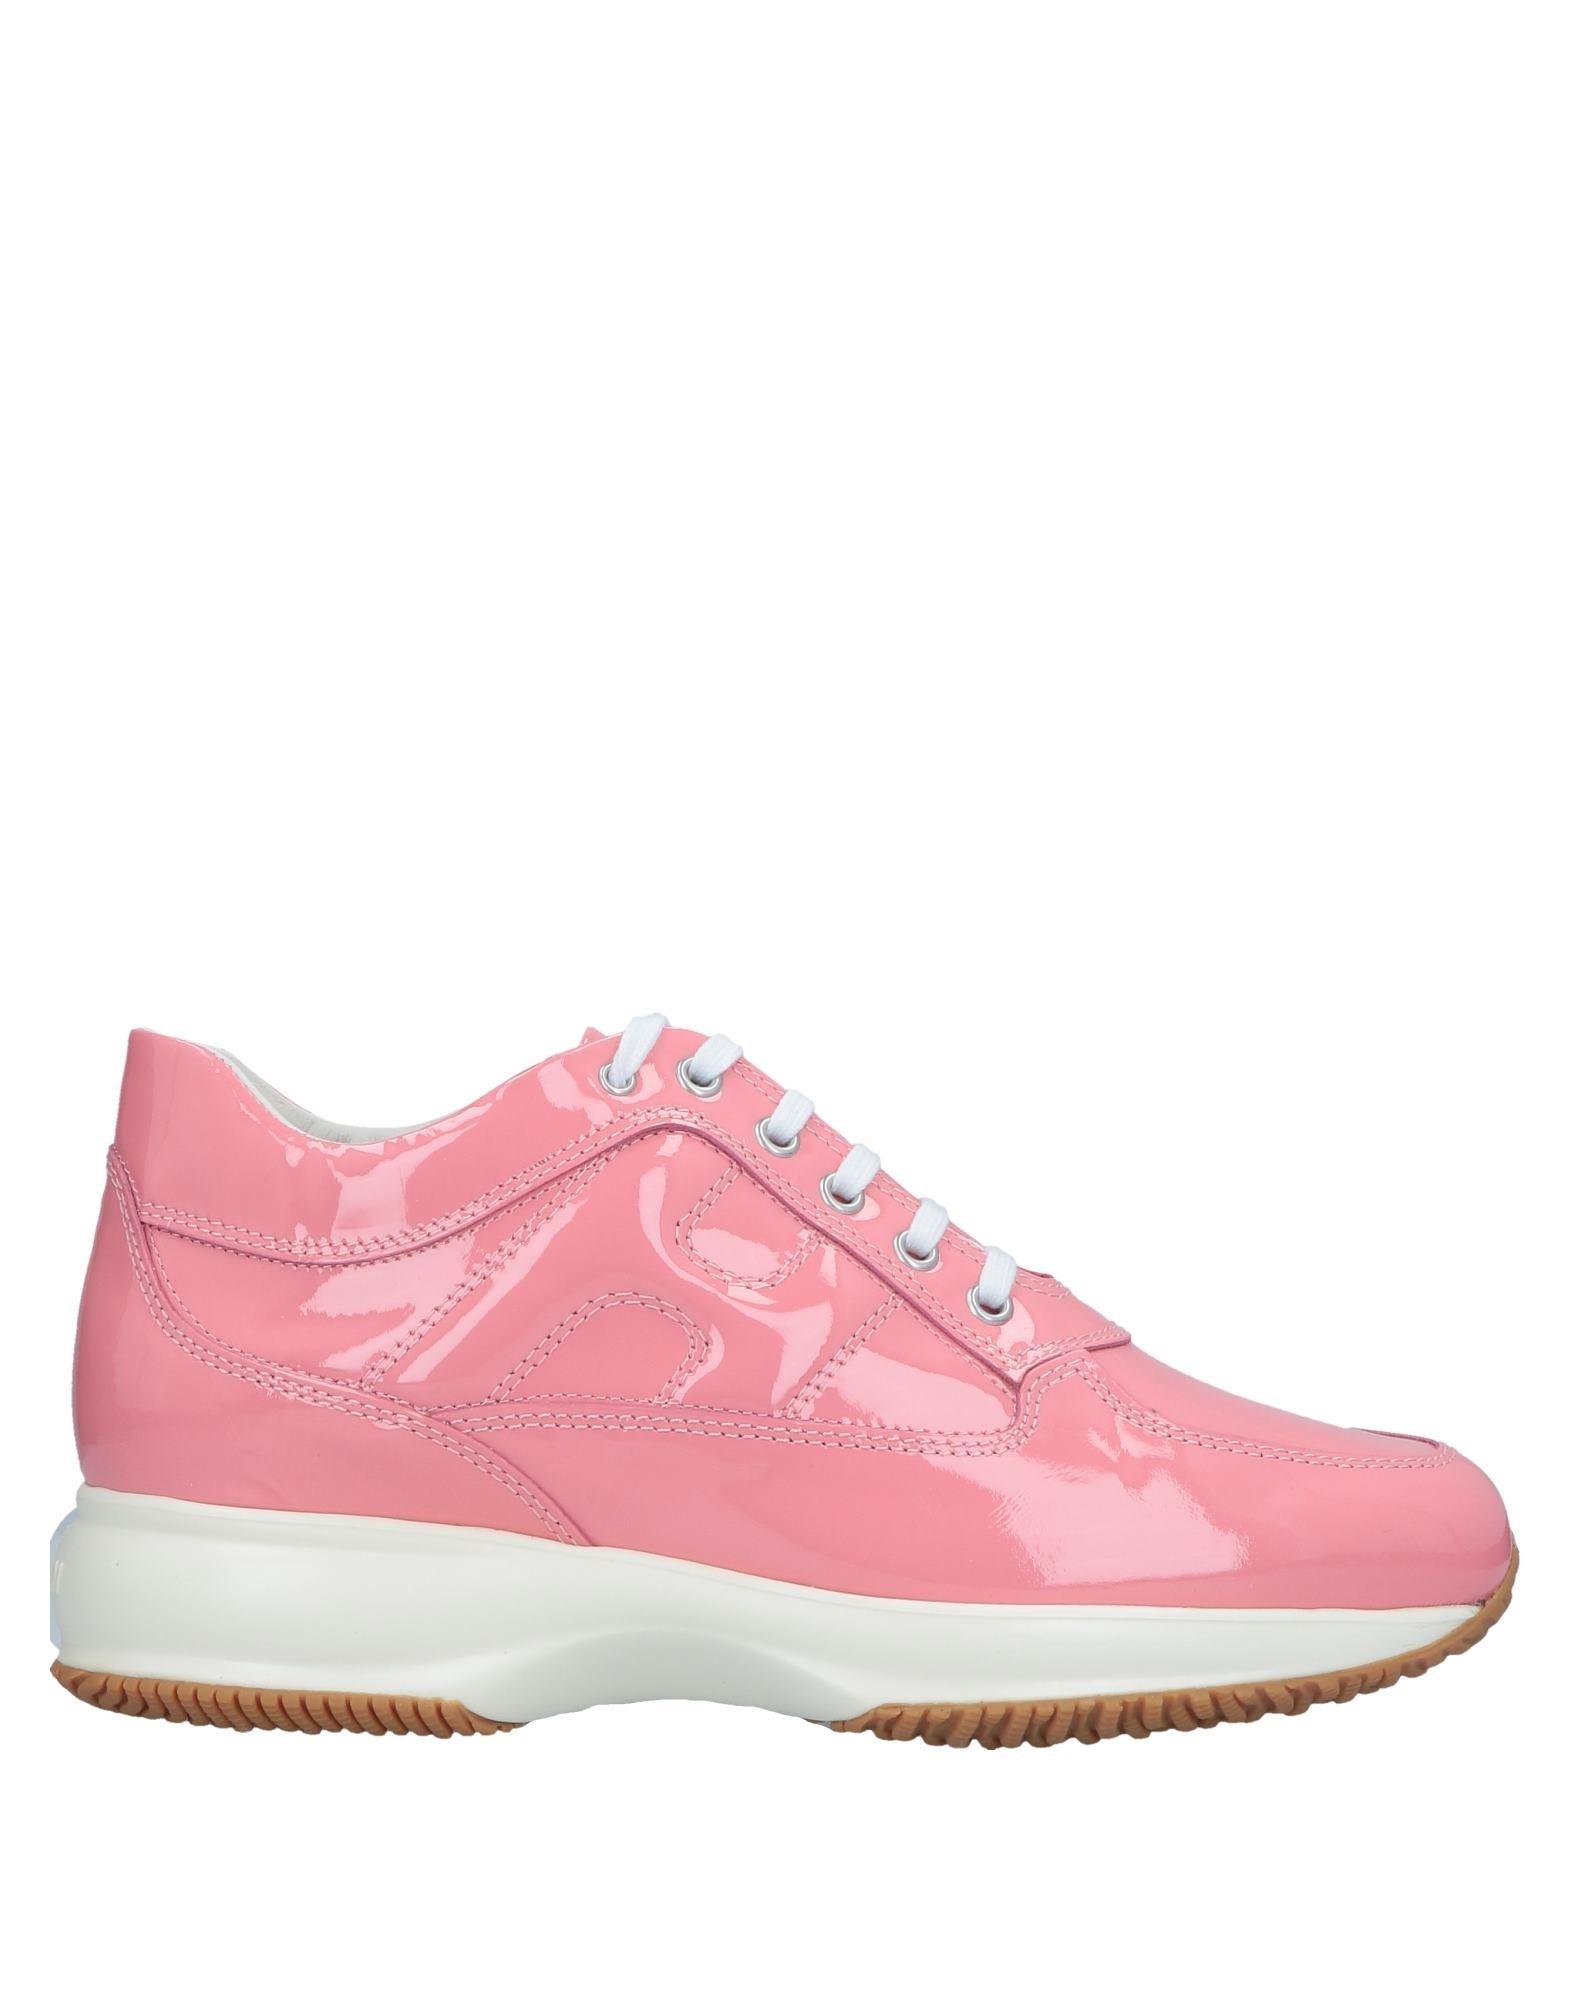 Hogan Leather Low-tops & Sneakers in Pink - Lyst